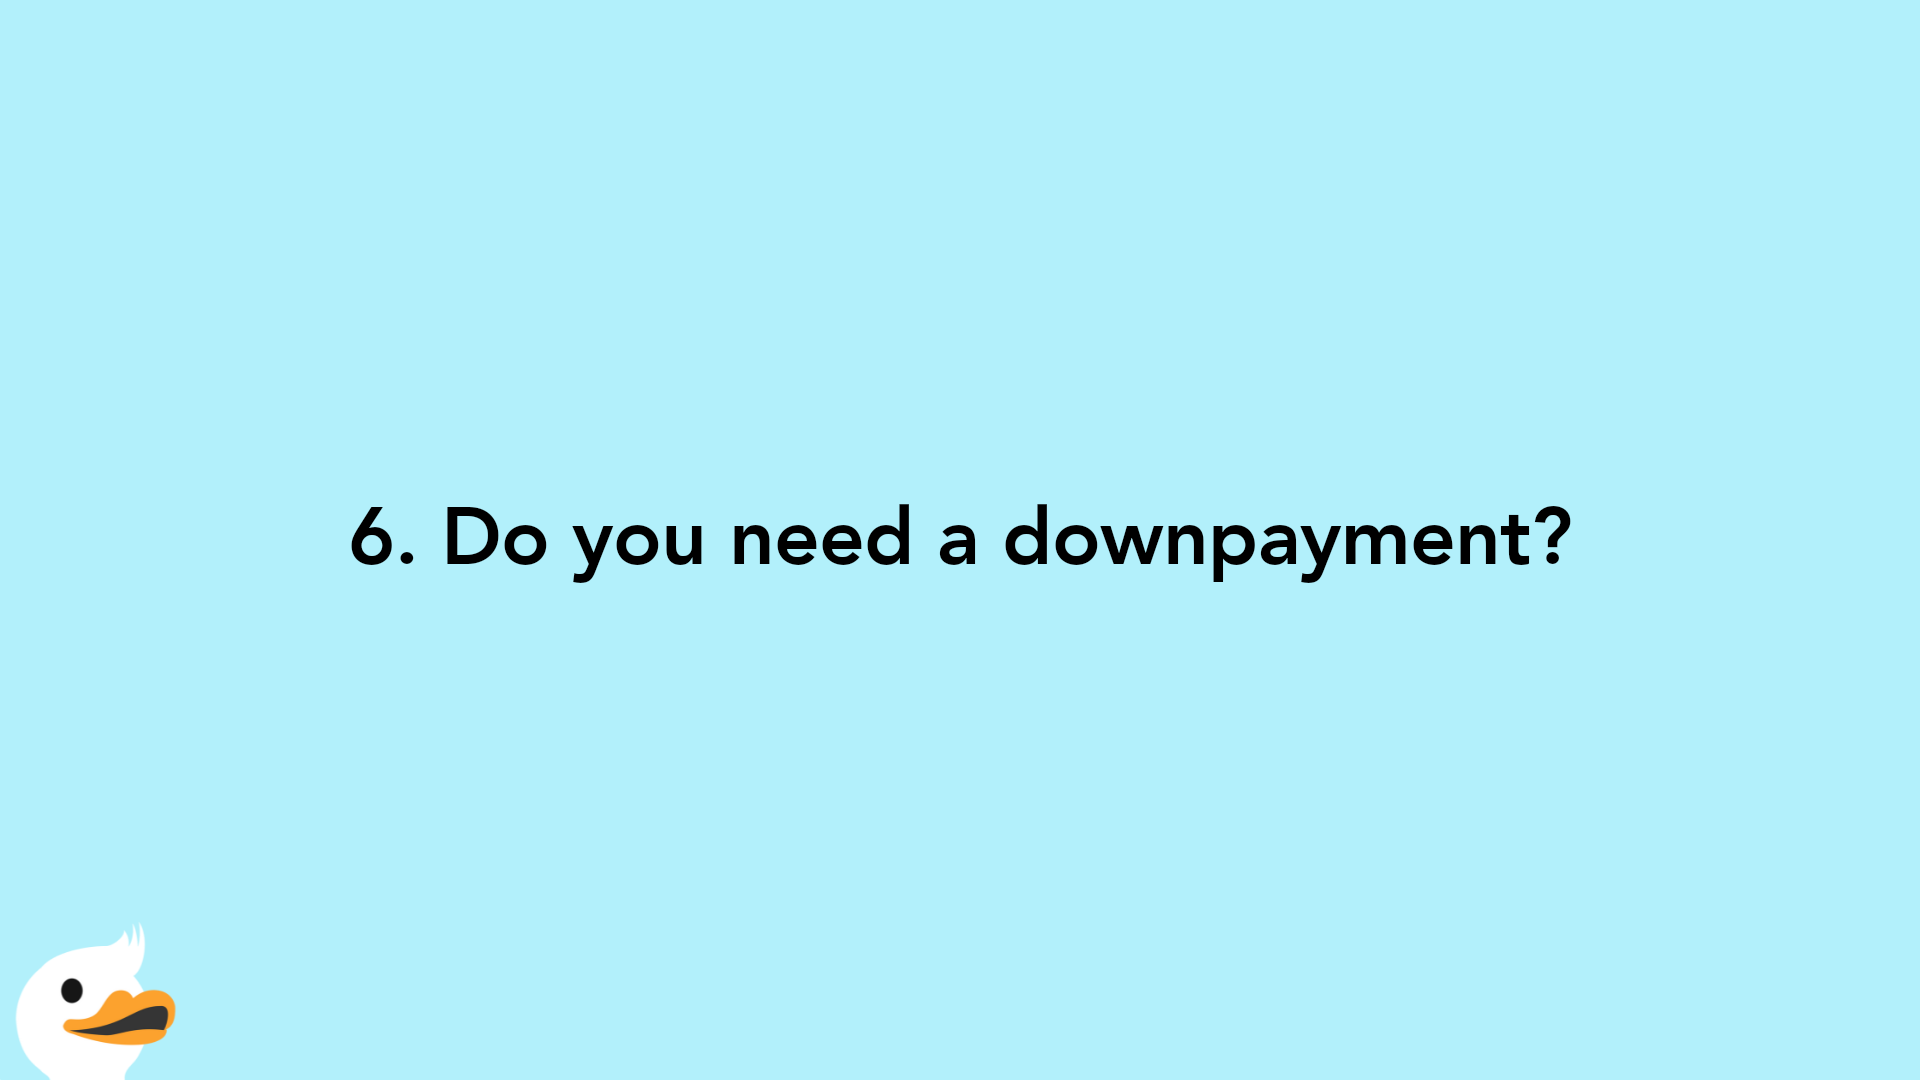 6. Do you need a downpayment?